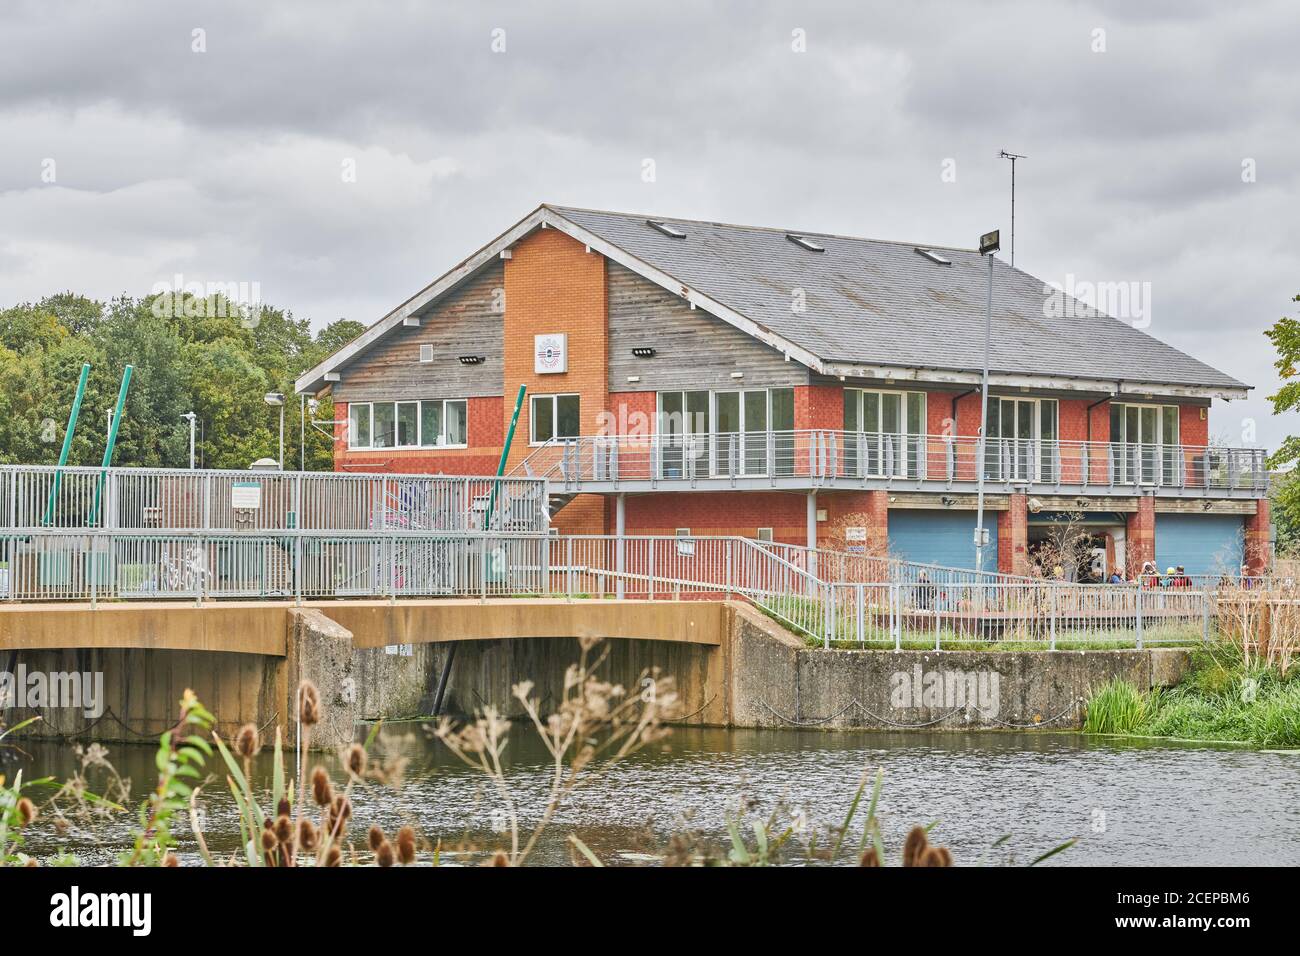 The 8th Earl Spencer centre building at the Nene artificial whitewater course, Northampton, England. Stock Photo